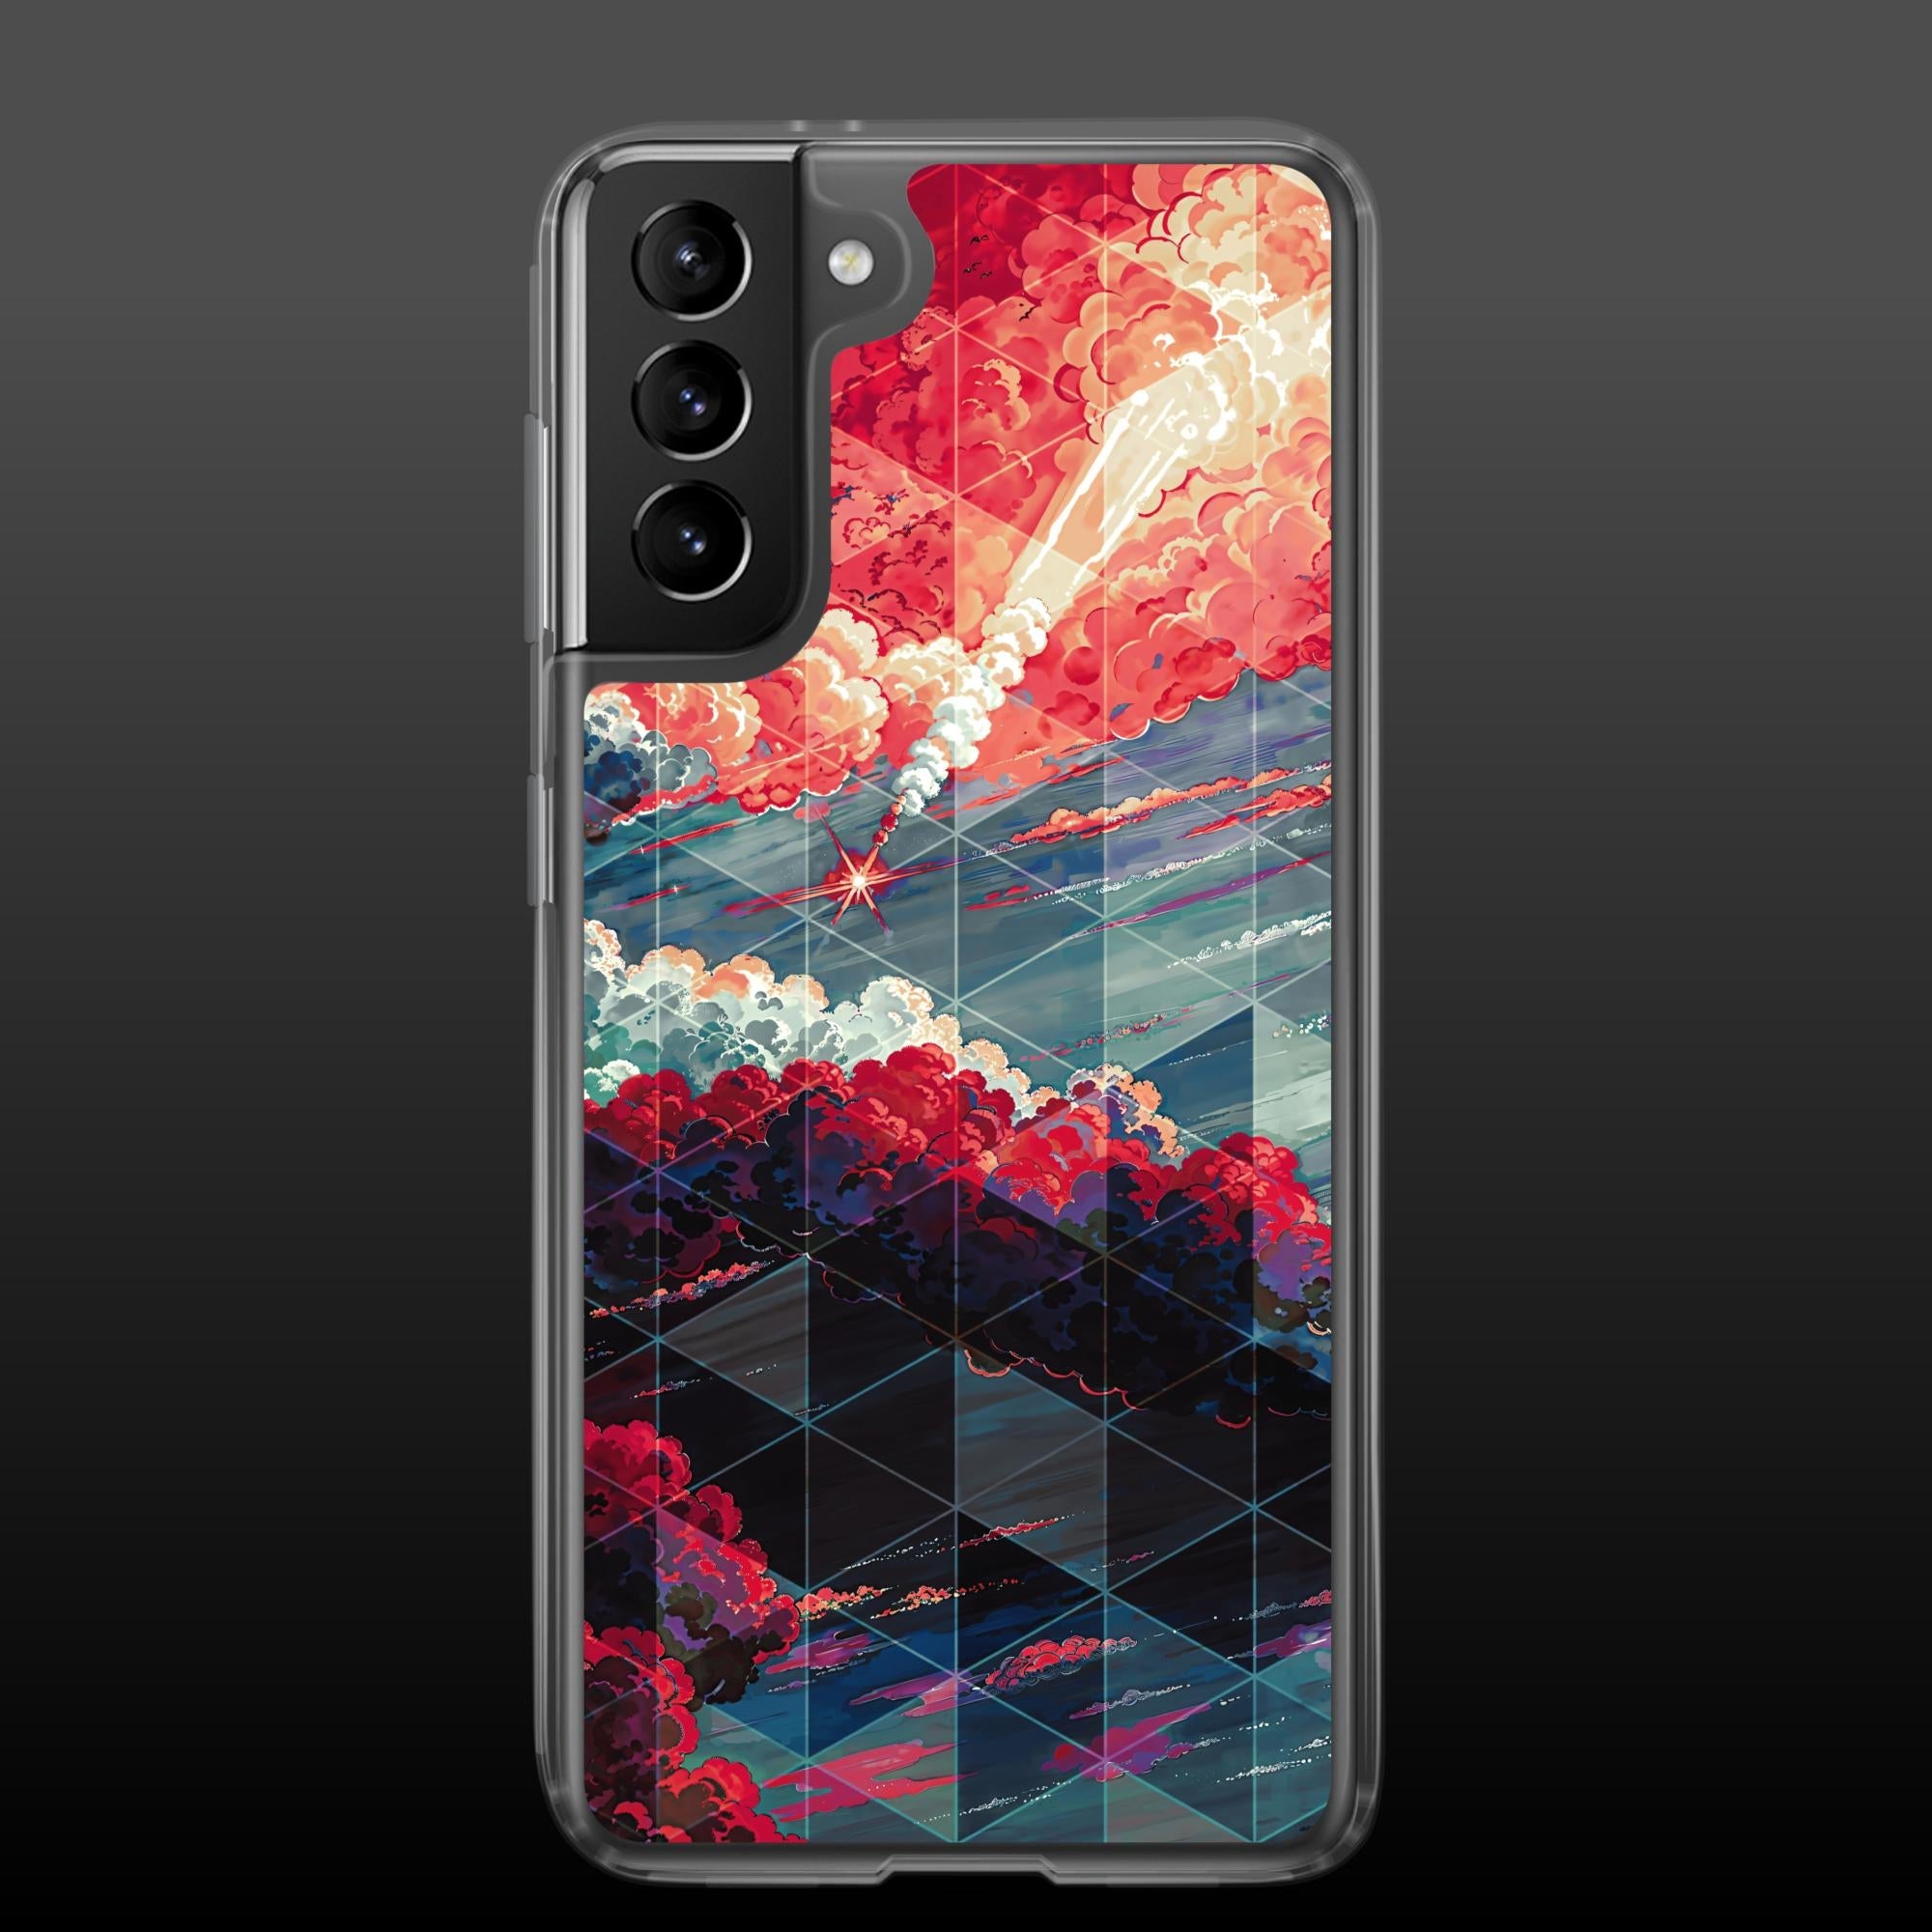 "Falling cataclysm" clear samsung case - Clear samsung case - Ever colorful